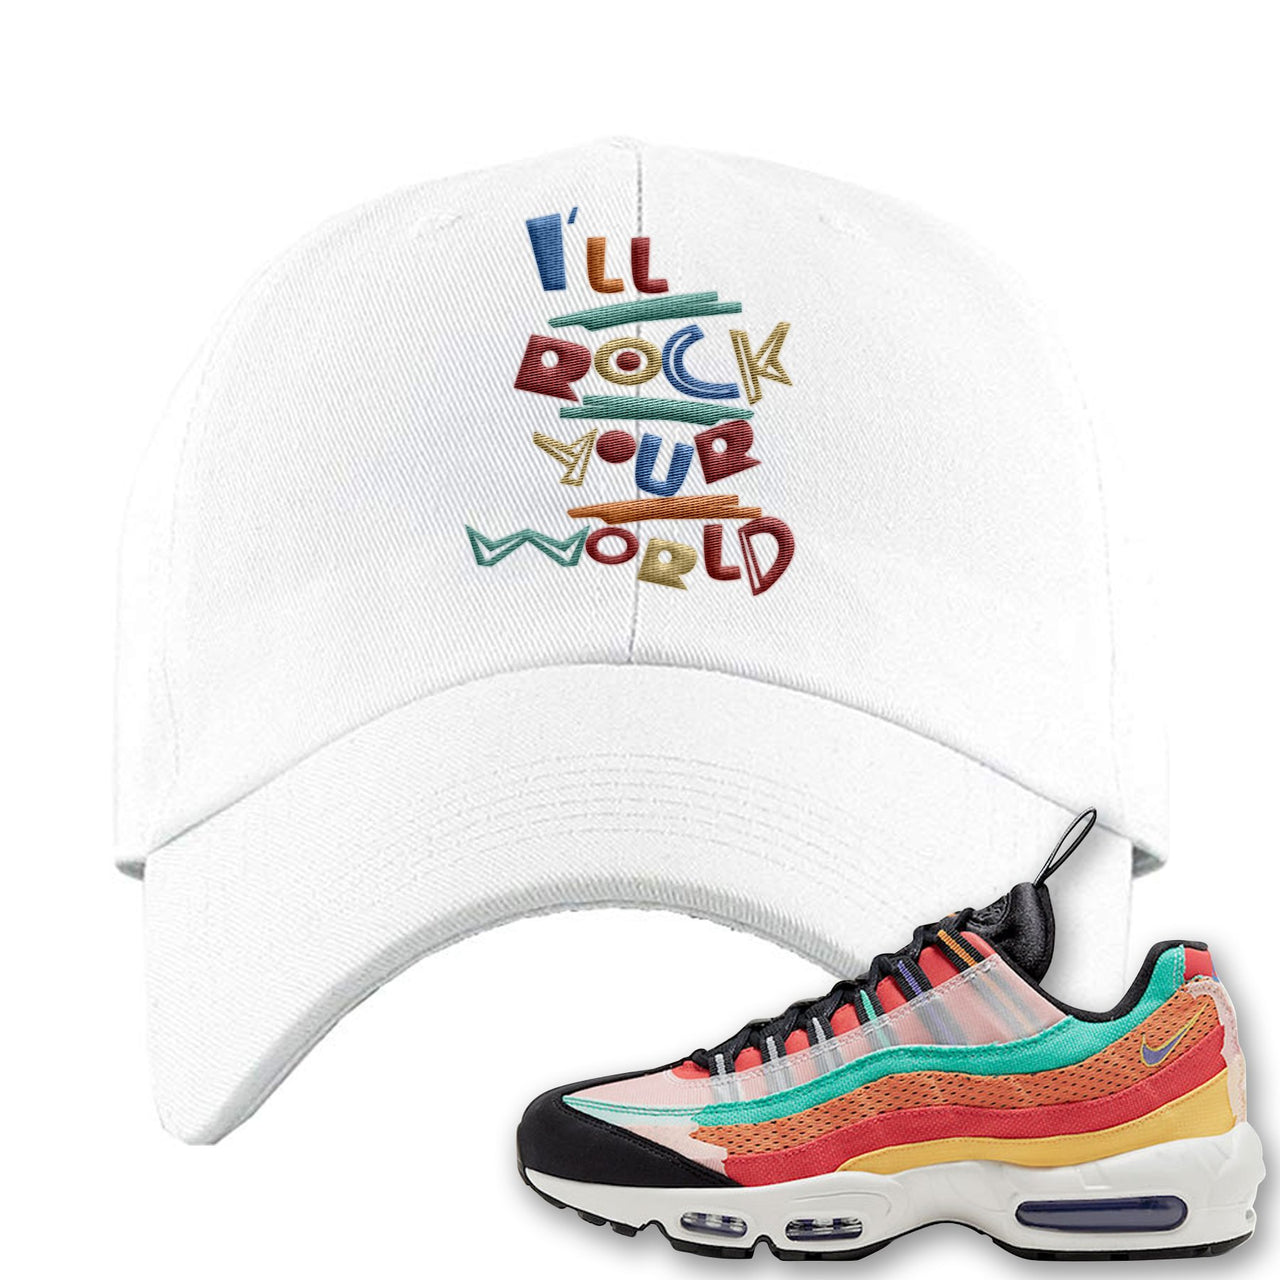 Air Max 95 Black History Month Sneaker White Dad Hat | Hat to match Air Max 95 Black History Month Shoes | I'll Rock Your World